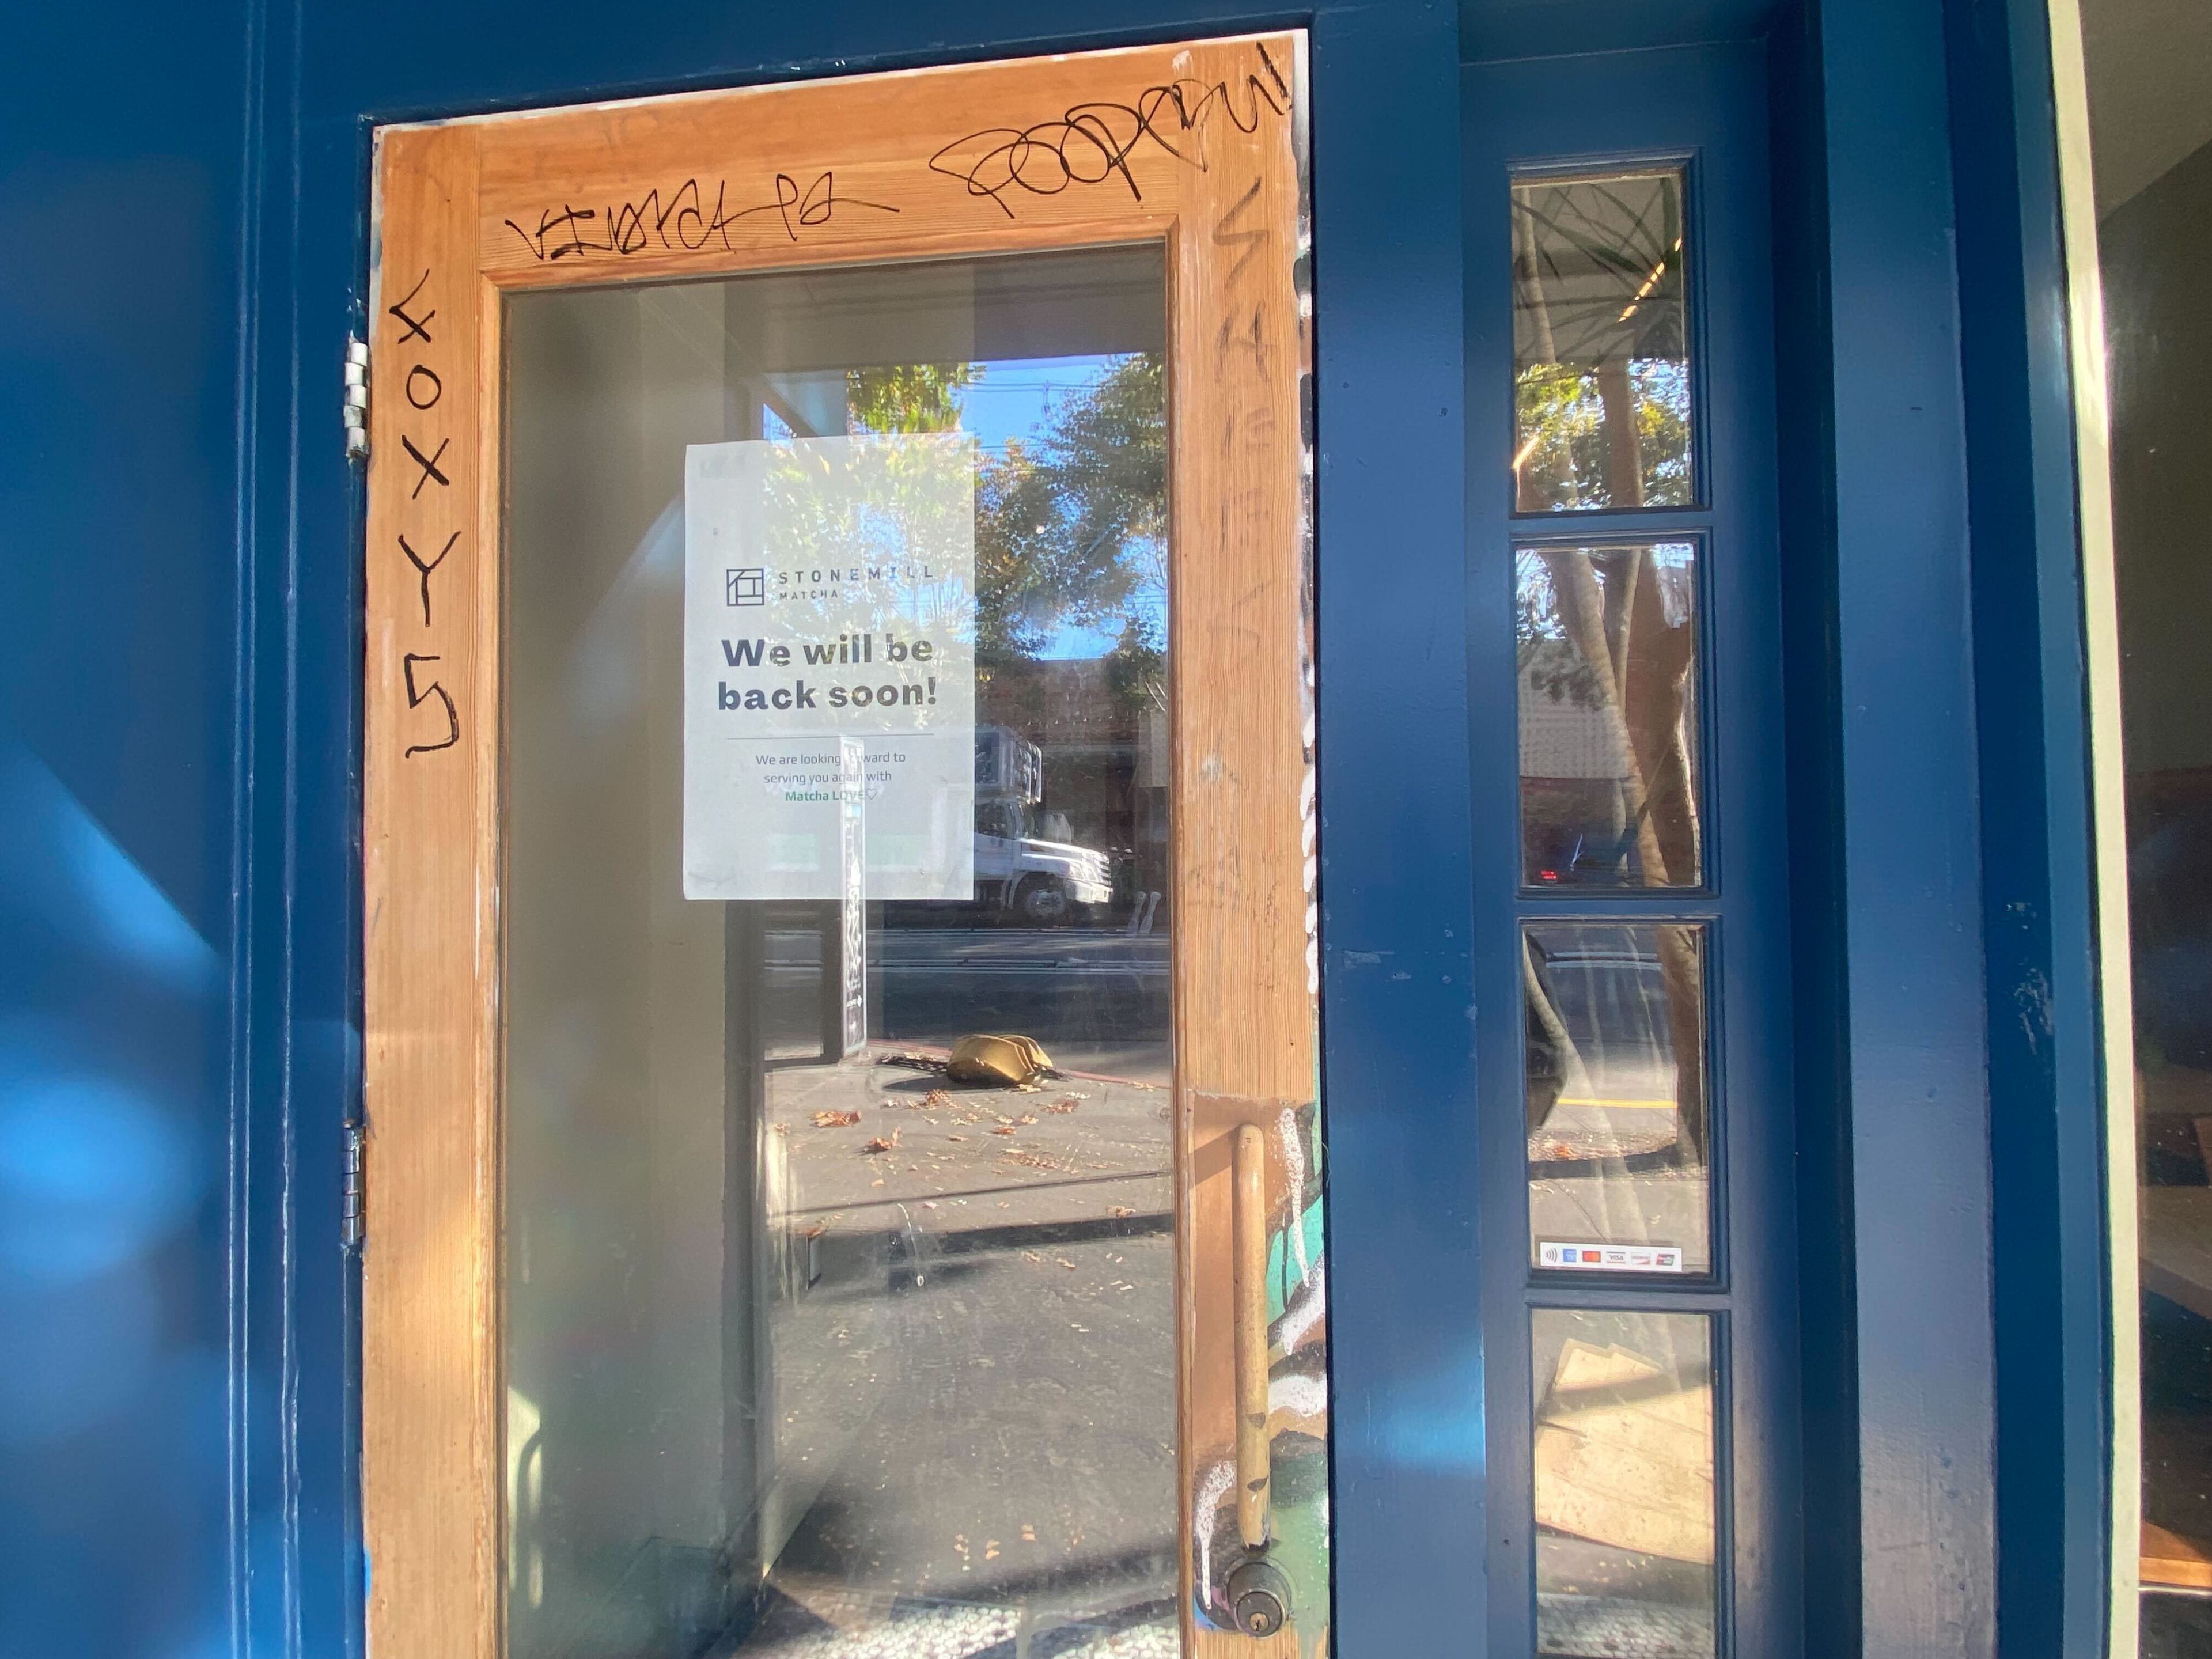 the door of a coffee shop shows a sign that signals the store will reopen soon